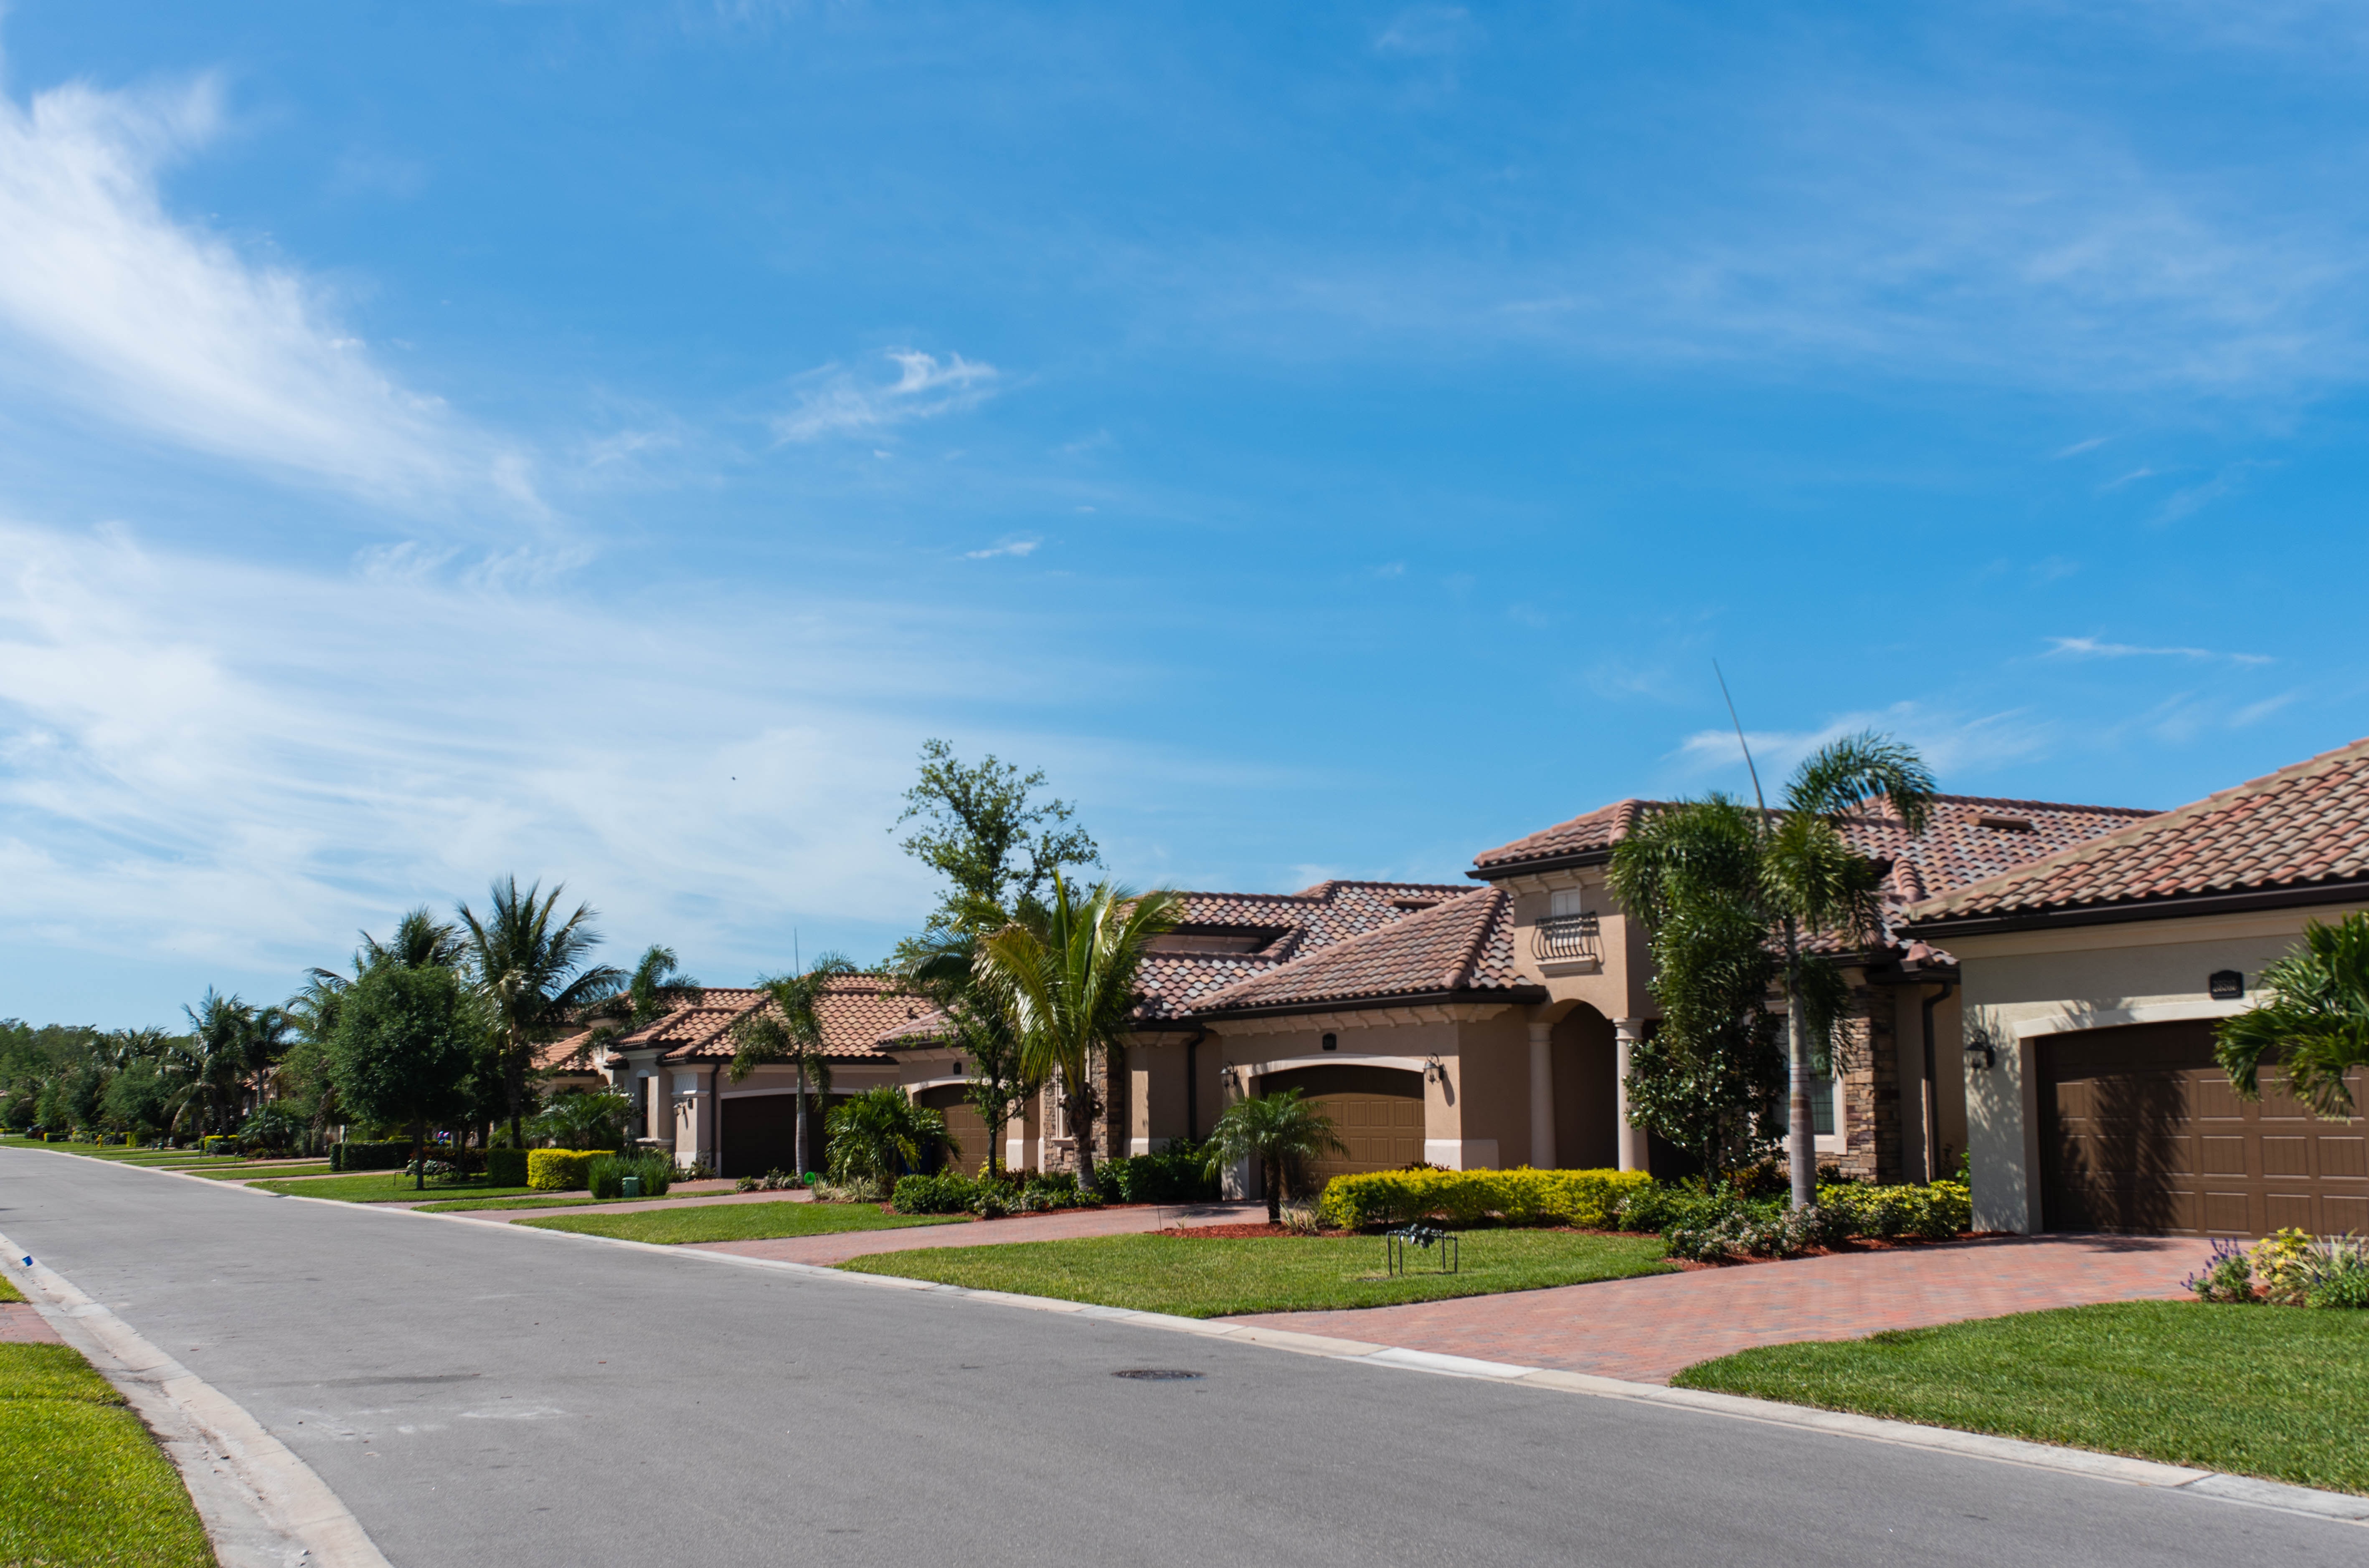 According to recent Census data, 71.3 percent of new-home sales were financed with conventional loans in Q1 2019, the eleventh quarter in a row in which these loans were used to finance more than 71 percent of all new-home sales.